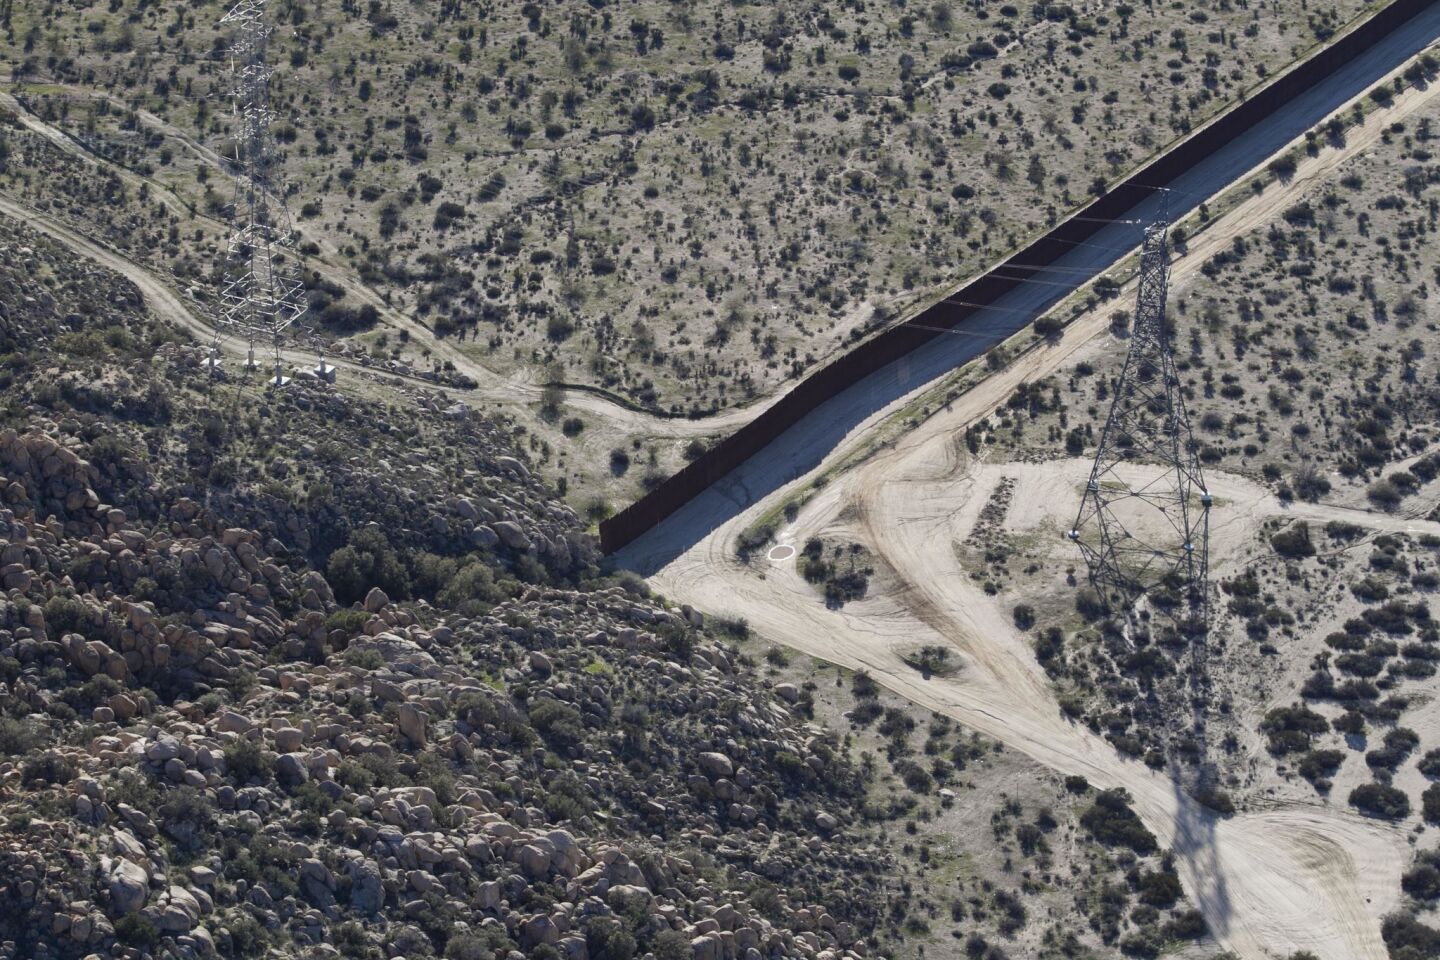 Steep cliffs, rocks and chaparral serve as a natural border wall in some parts of California. This is an aerial view in southeastern Imperial County